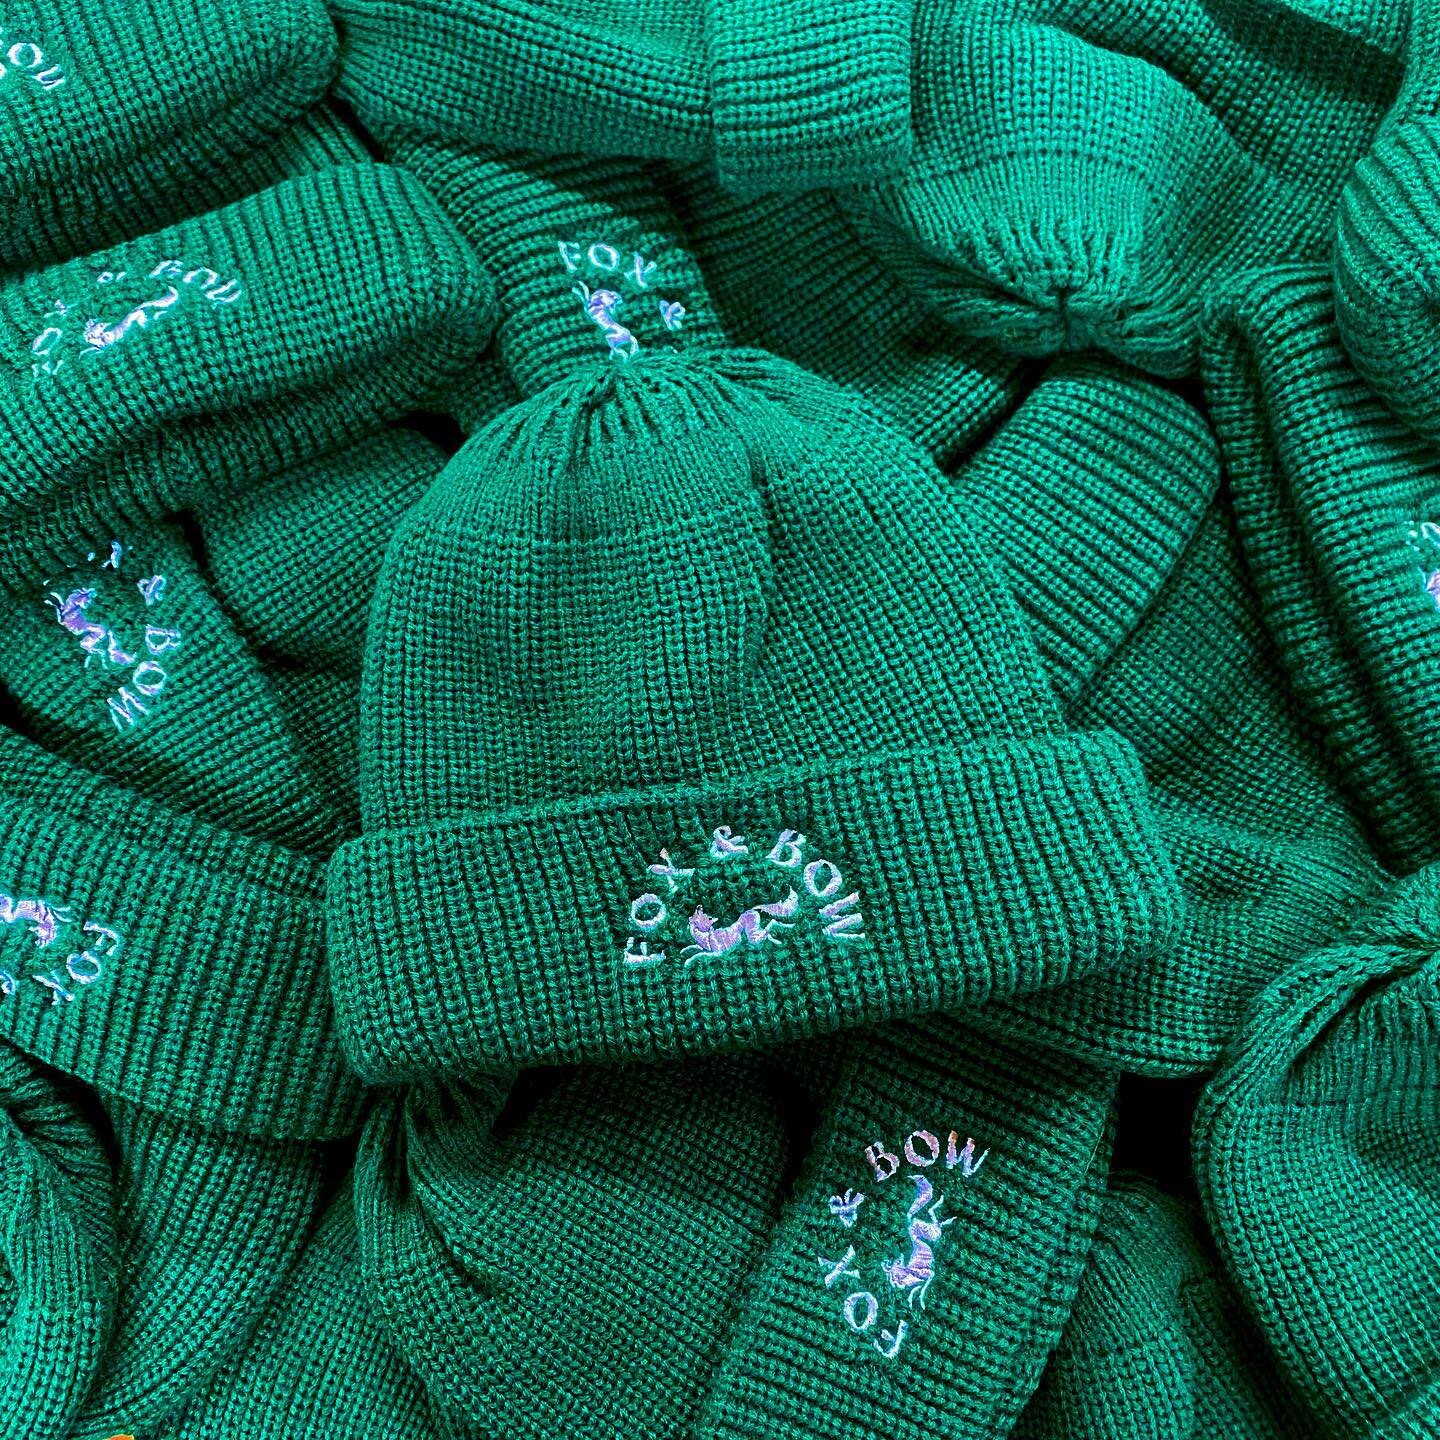 Some layday beanies we did for @foxandbow_ a minute ago